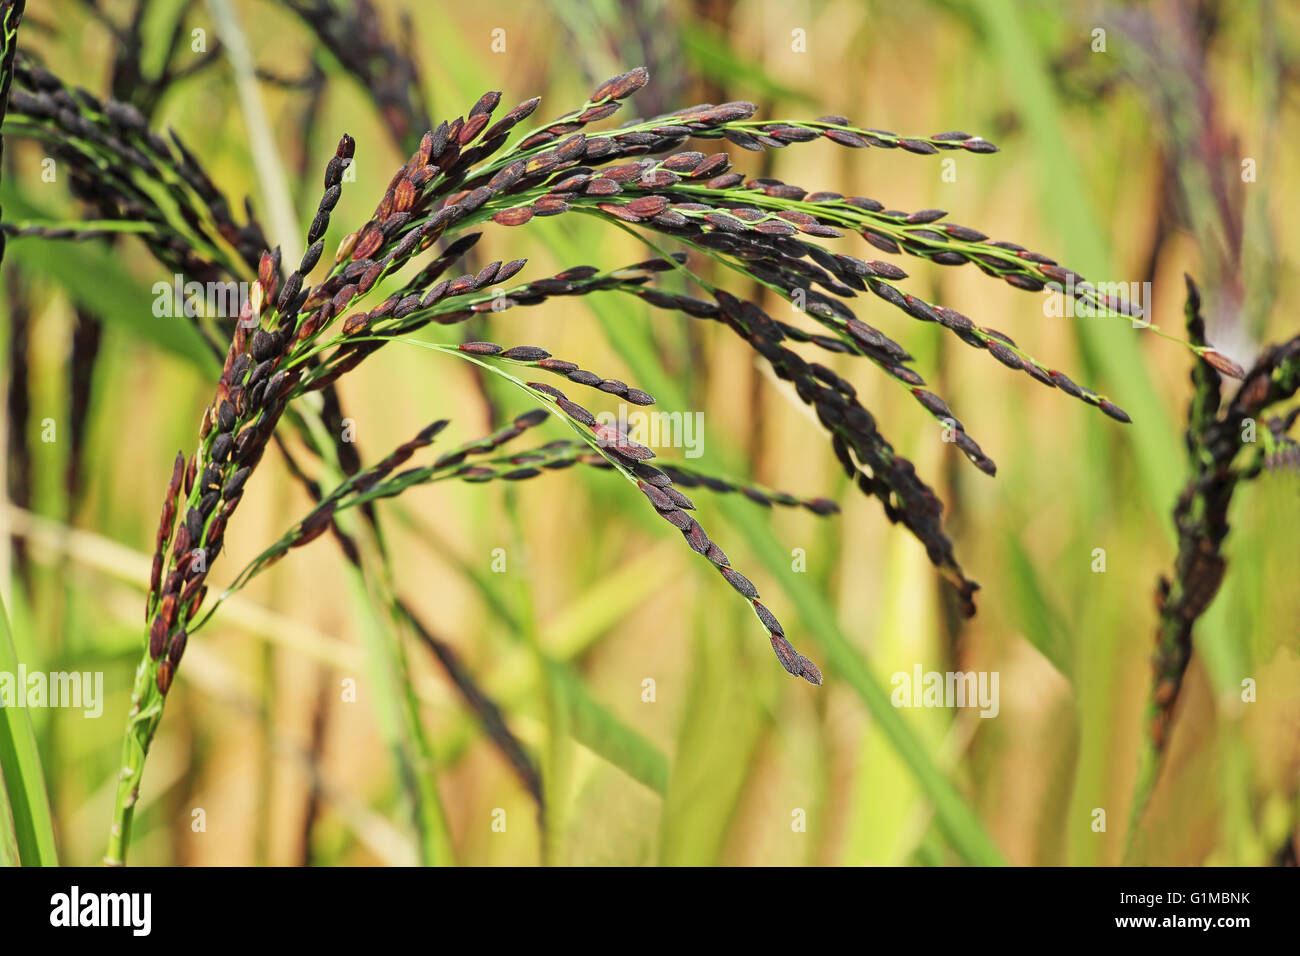 Close up of hybrid rice paddy plant stalk with grains from India. Stock Photo